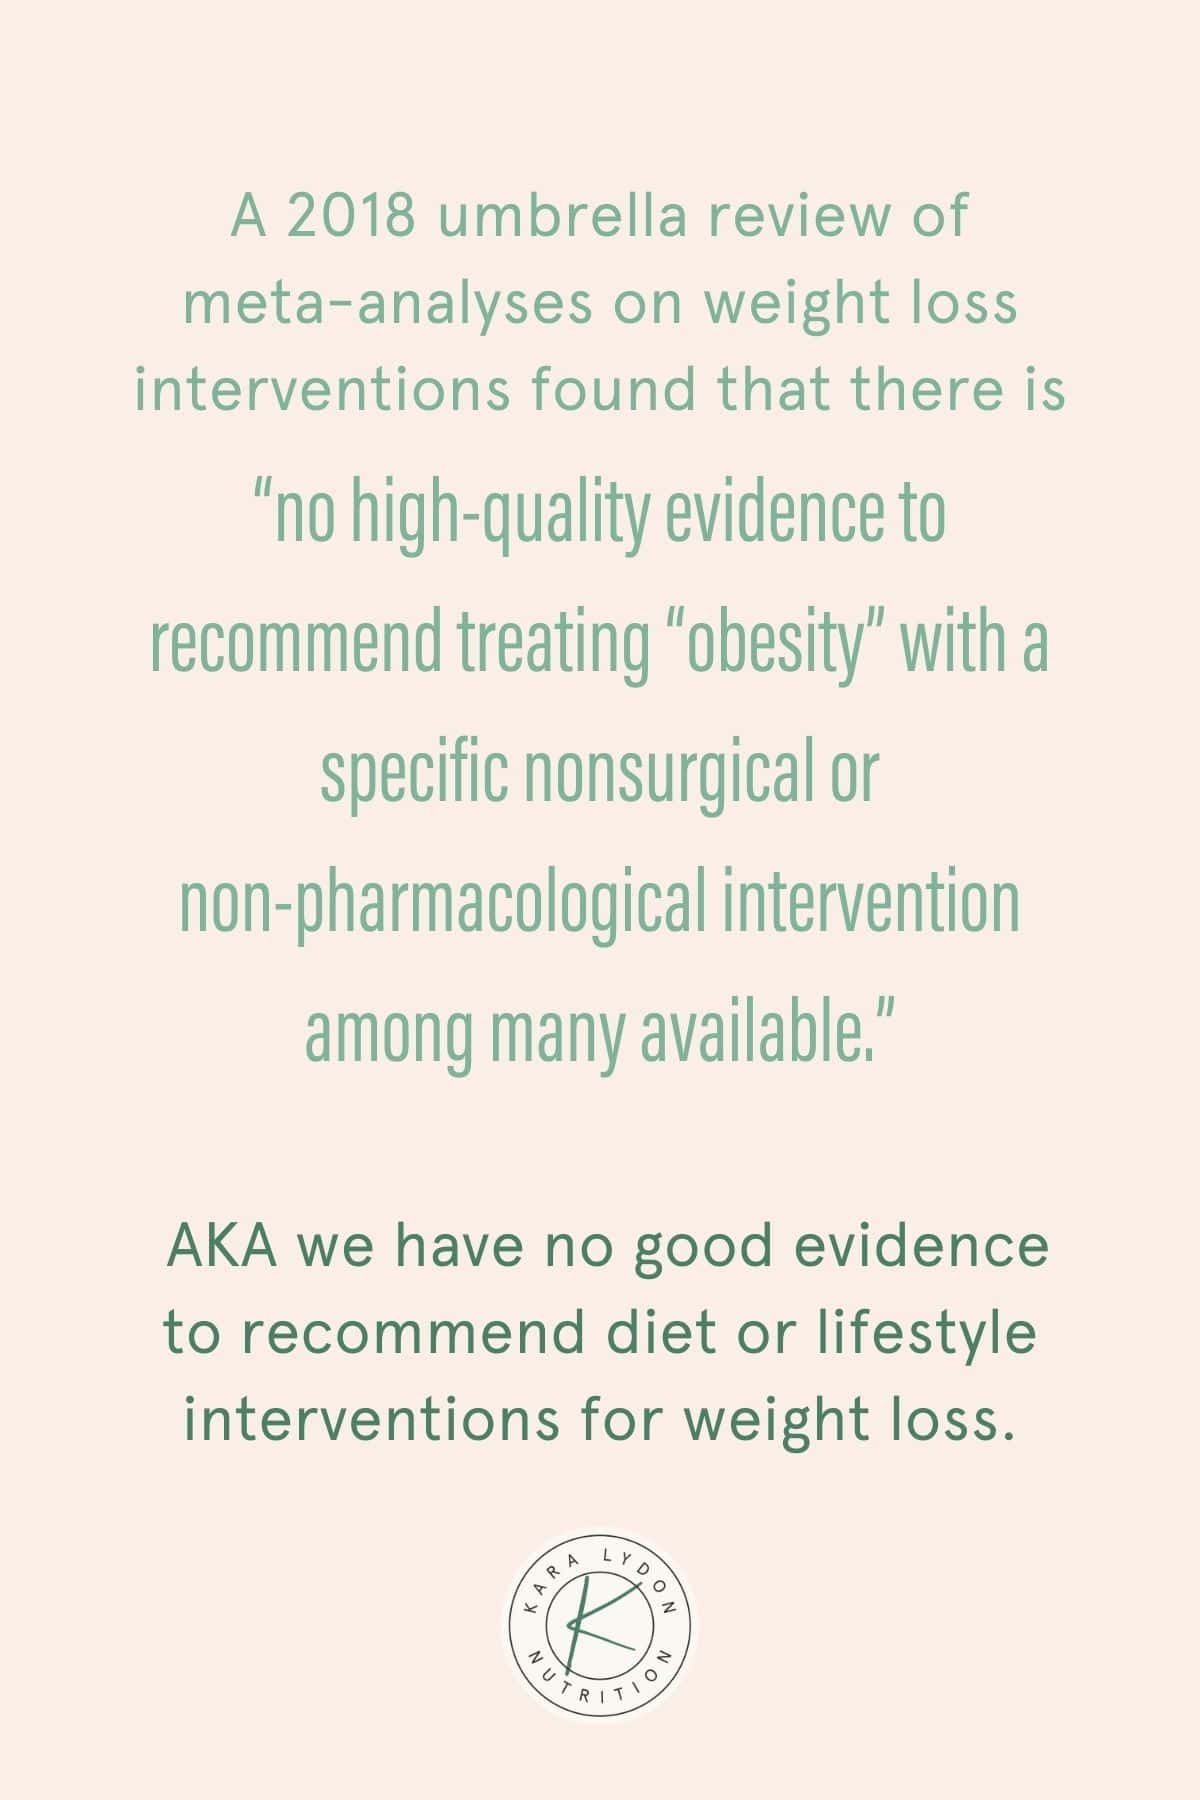 Graphic with quote: "A 2018 general review of meta-analyses on weight loss interventions found that there "there is no high-quality evidence to recommend a treatment "portliness" with a specific non-surgical or non-pharmacological intervention among many available." AKA we don't have good evidence to recommend dietary or lifestyle interventions for weight loss."